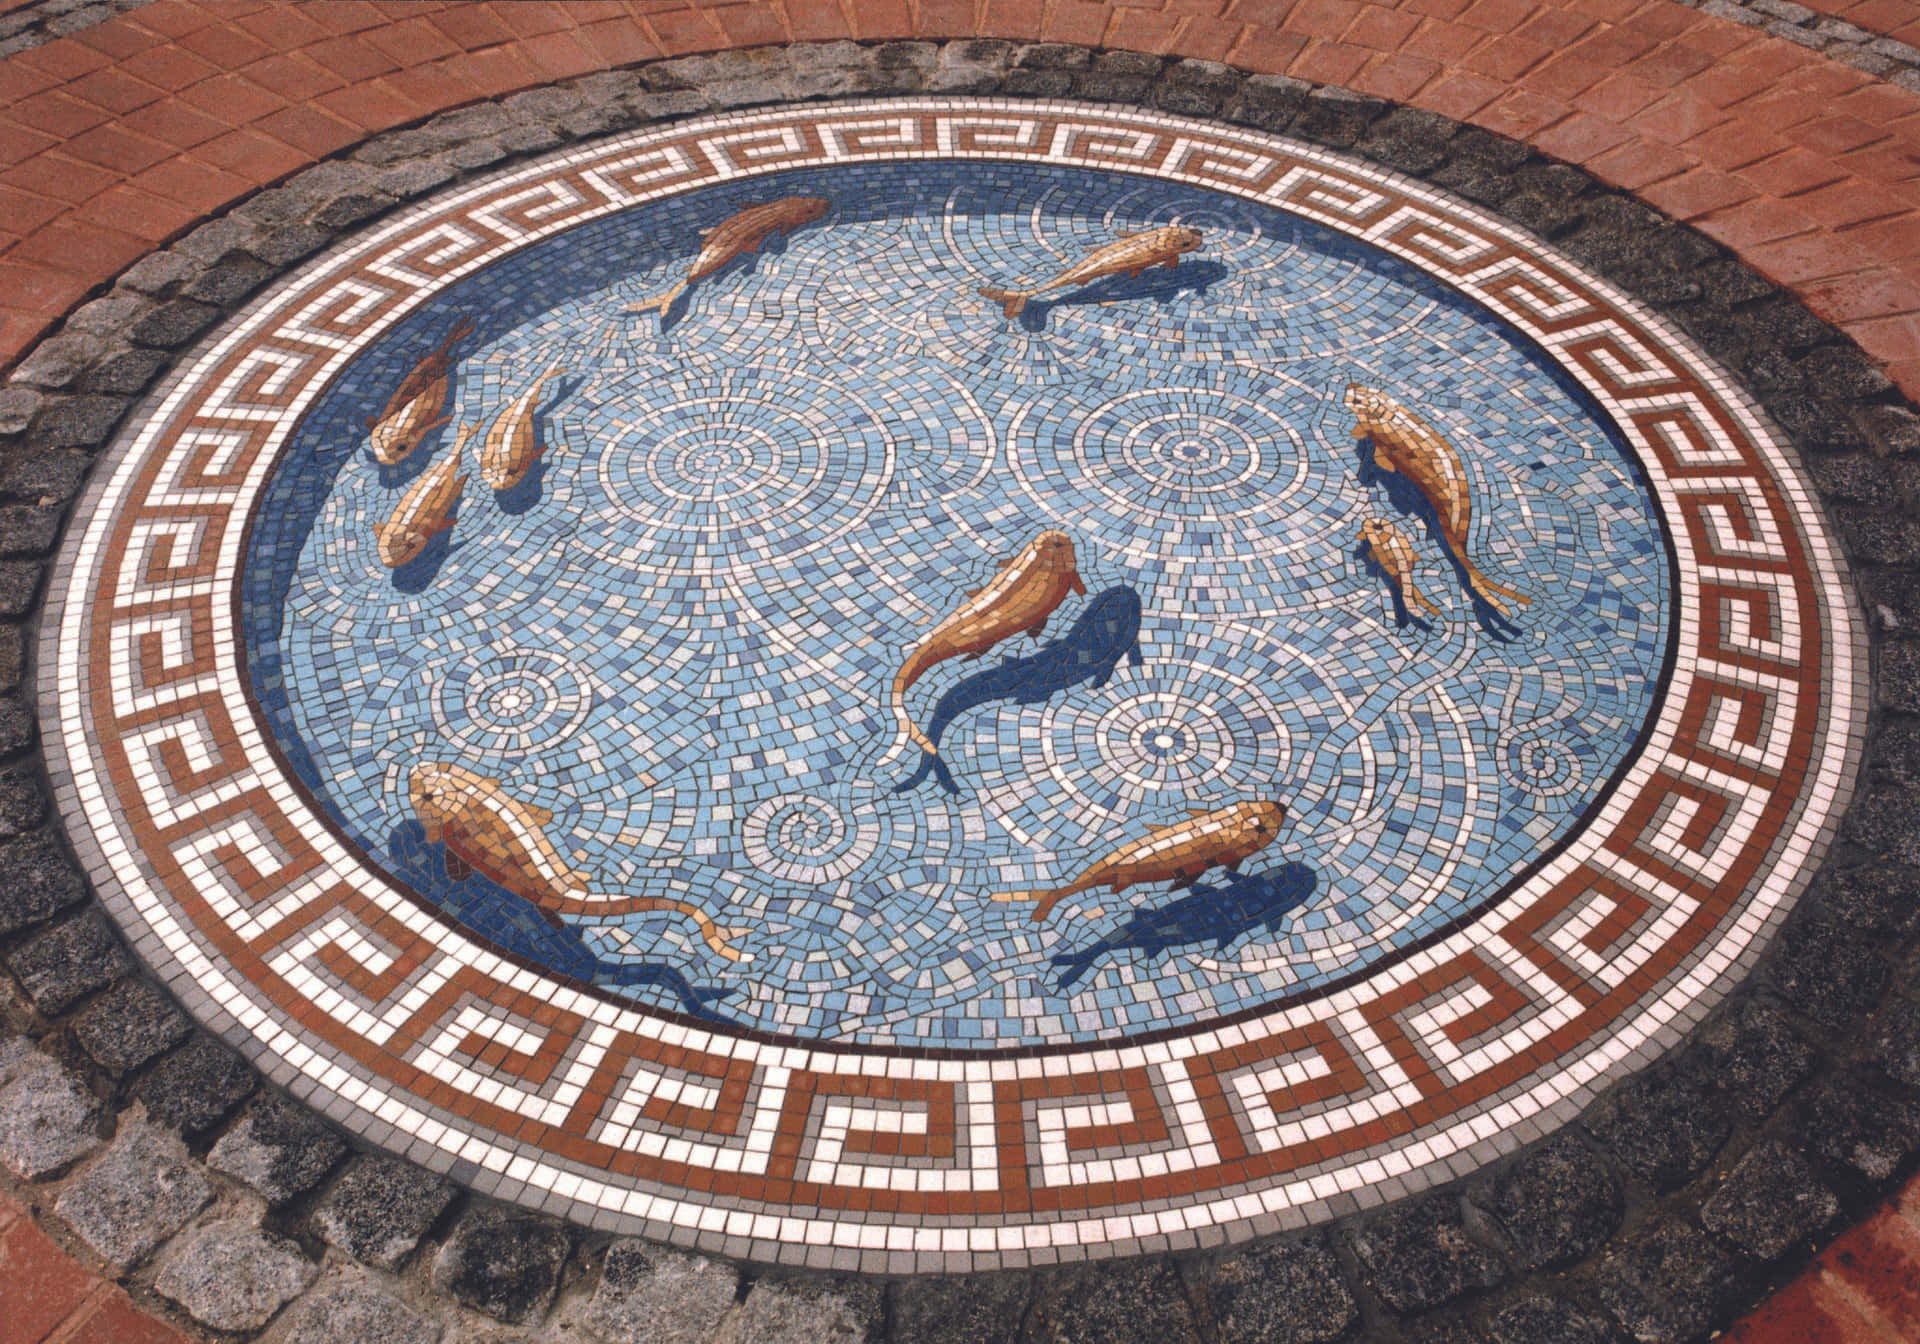 A Circular Mosaic With Fish In It